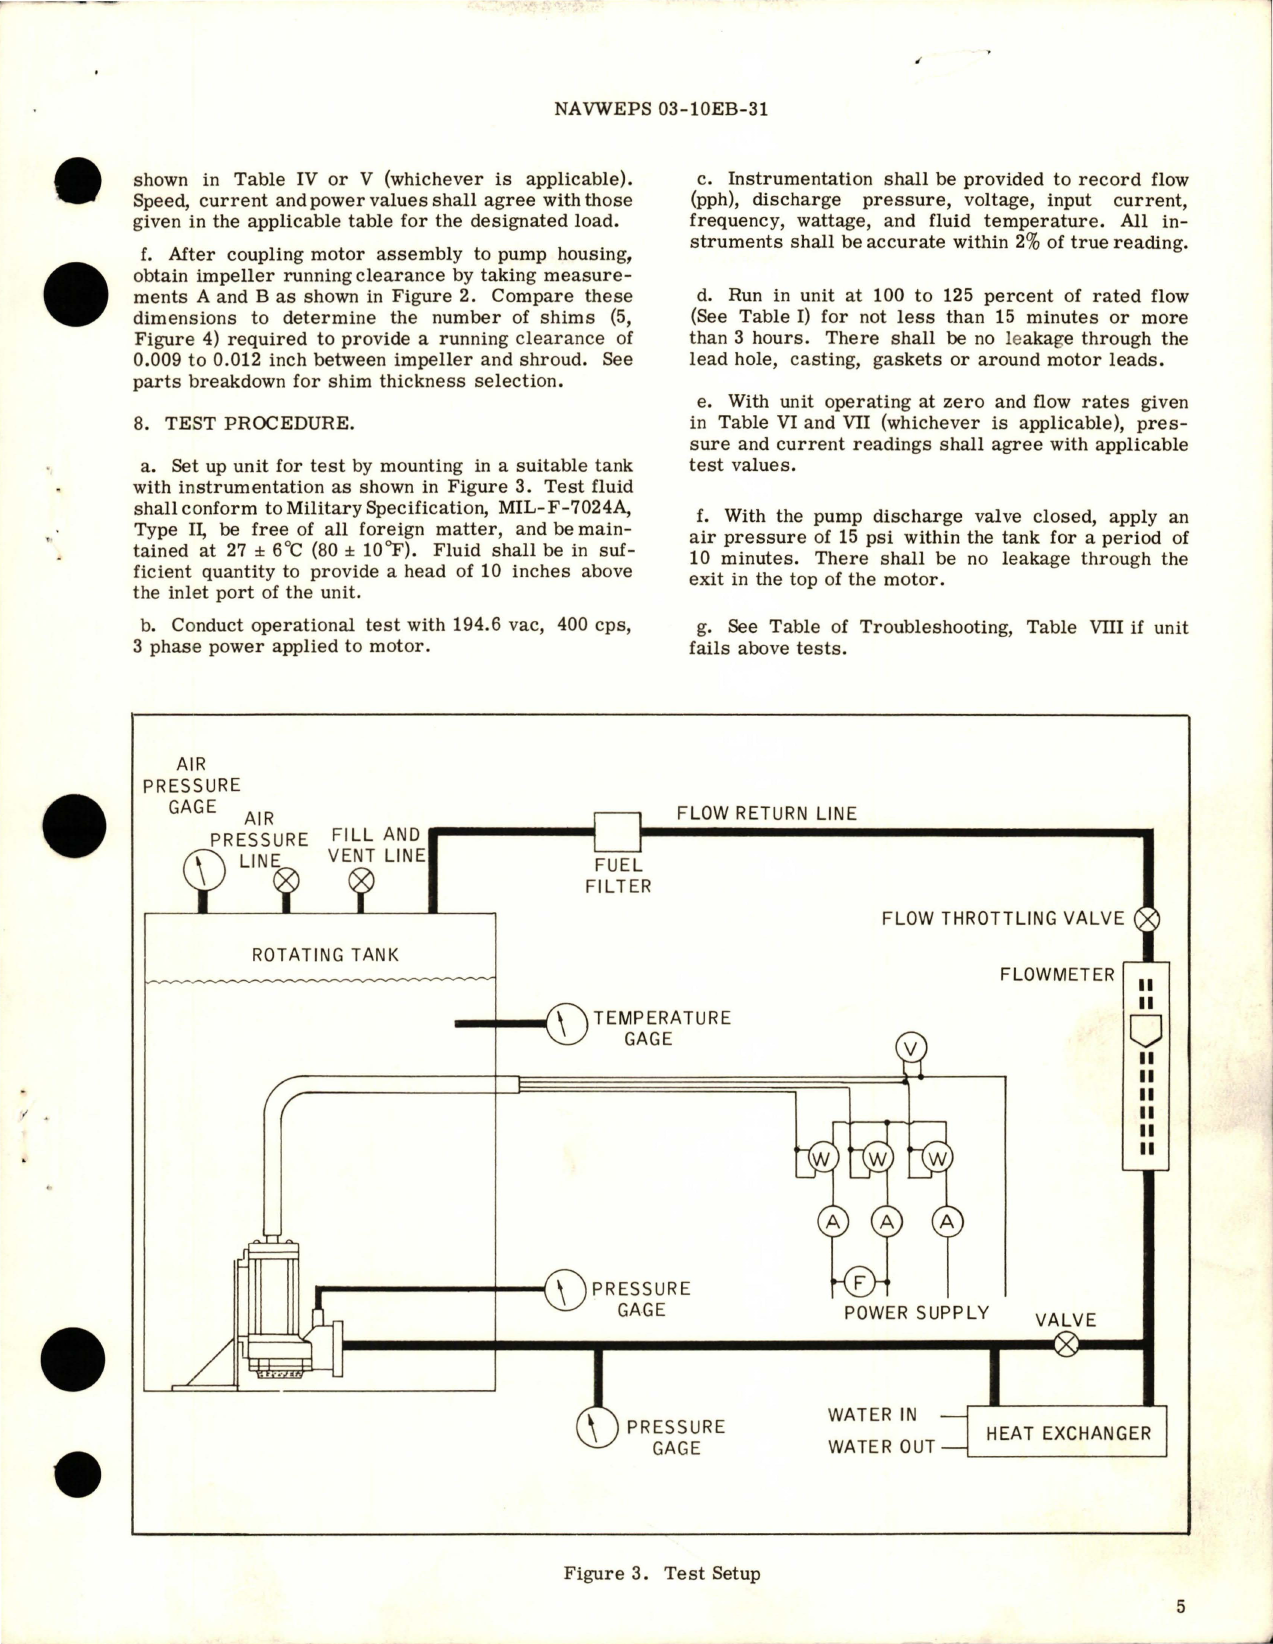 Sample page 5 from AirCorps Library document: Overhaul Instructions with Parts Breakdown for Fuel Booster Pump - Models RG11920, RG11920-1, RG11920-2, and RG11920-A1